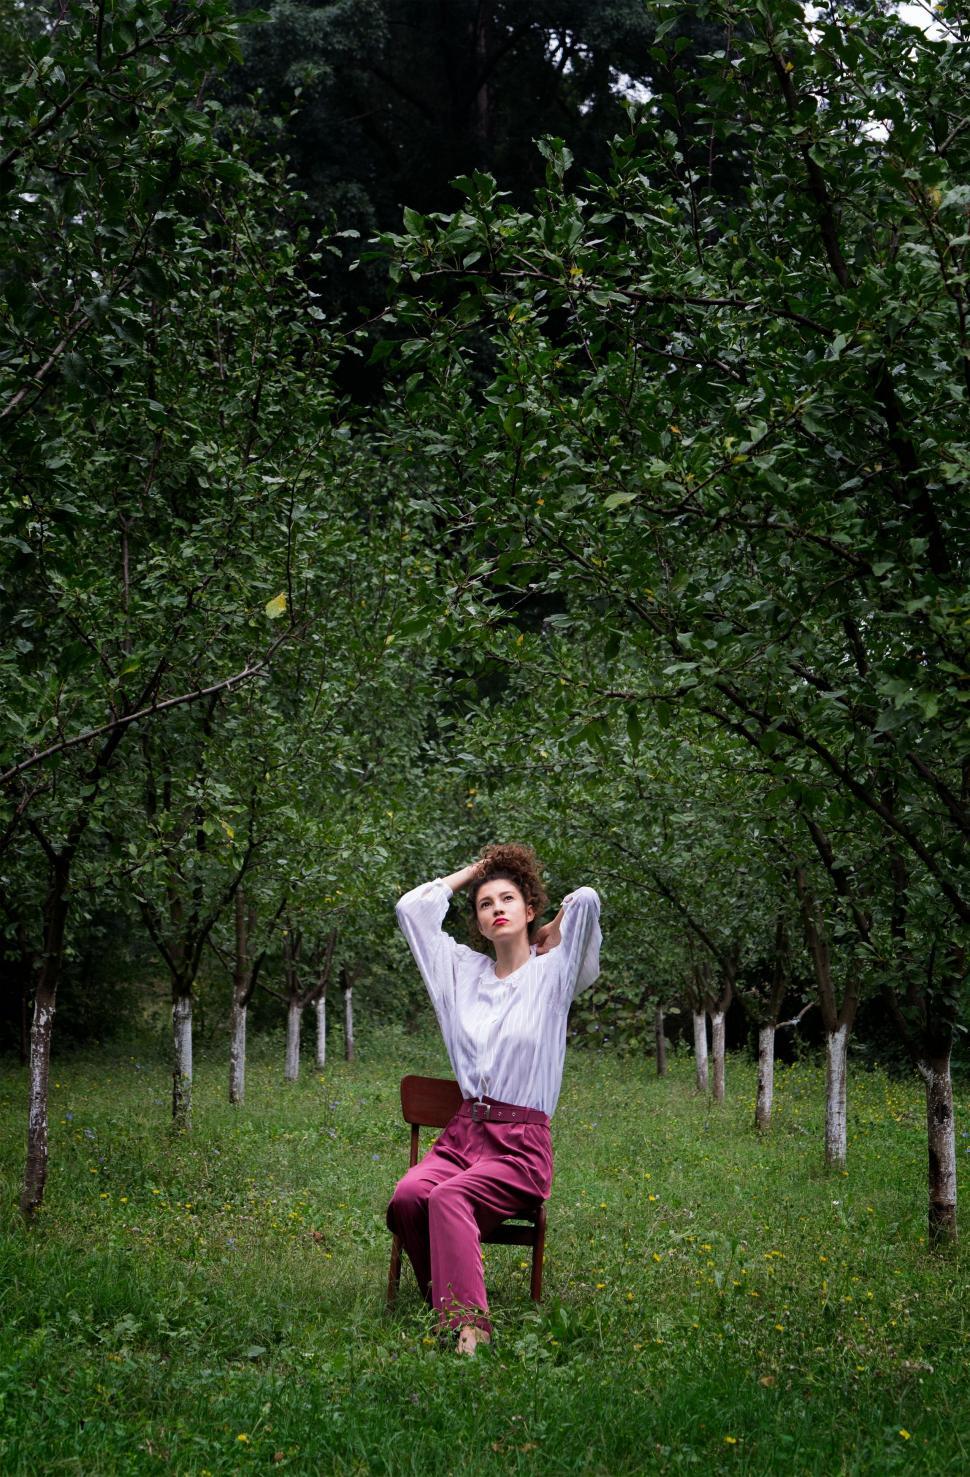 Free Image of Woman Sitting on Chair in Field of Trees 